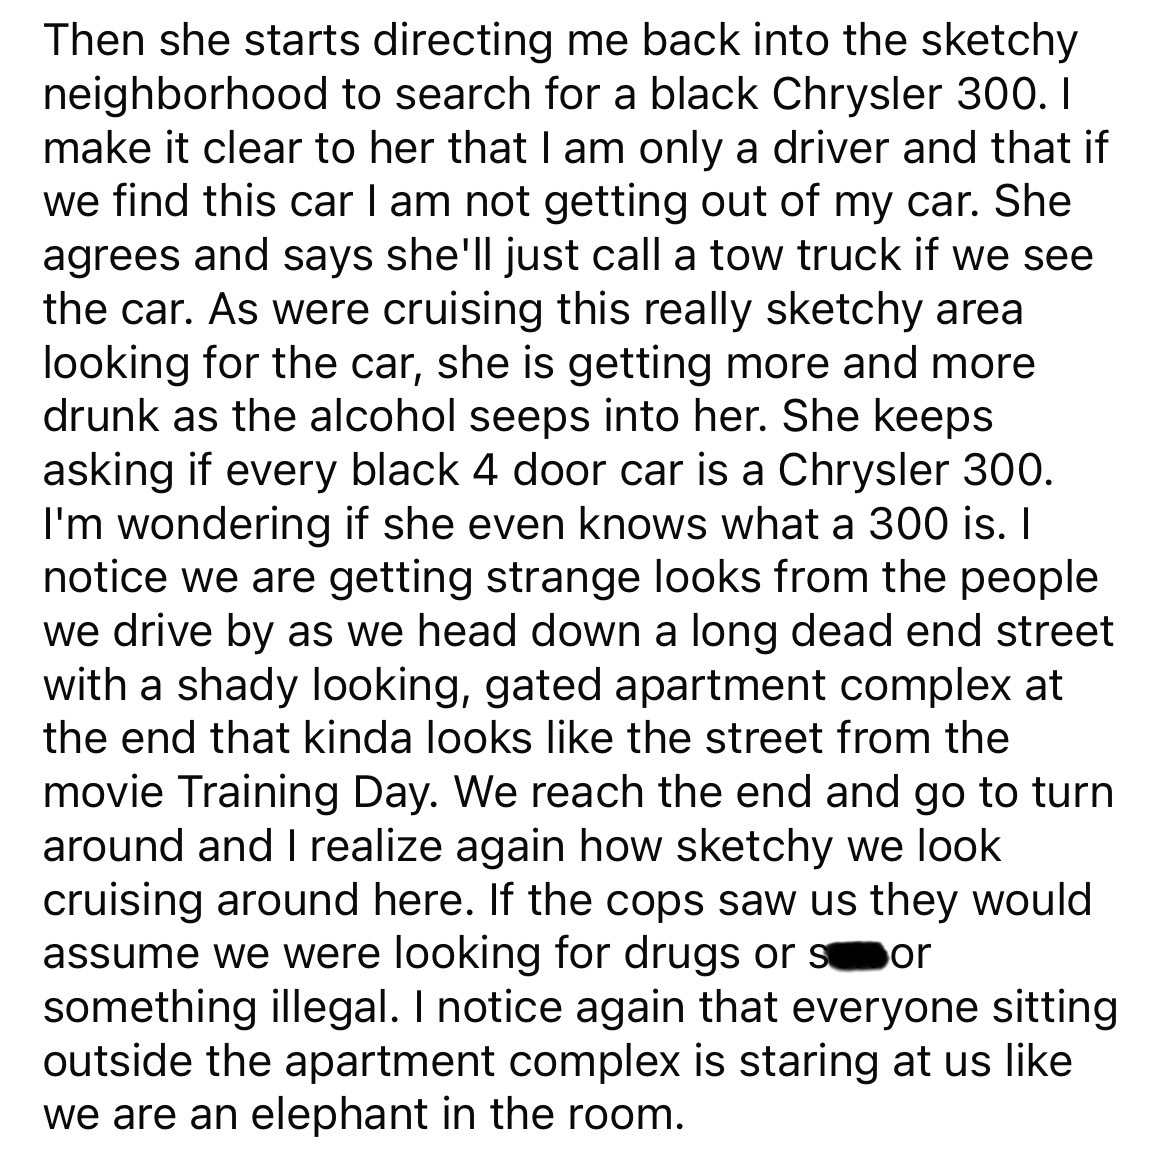 document - Then she starts directing me back into the sketchy neighborhood to search for a black Chrysler 300. I make it clear to her that I am only a driver and that if we find this car I am not getting out of my car. She agrees and says she'll just call